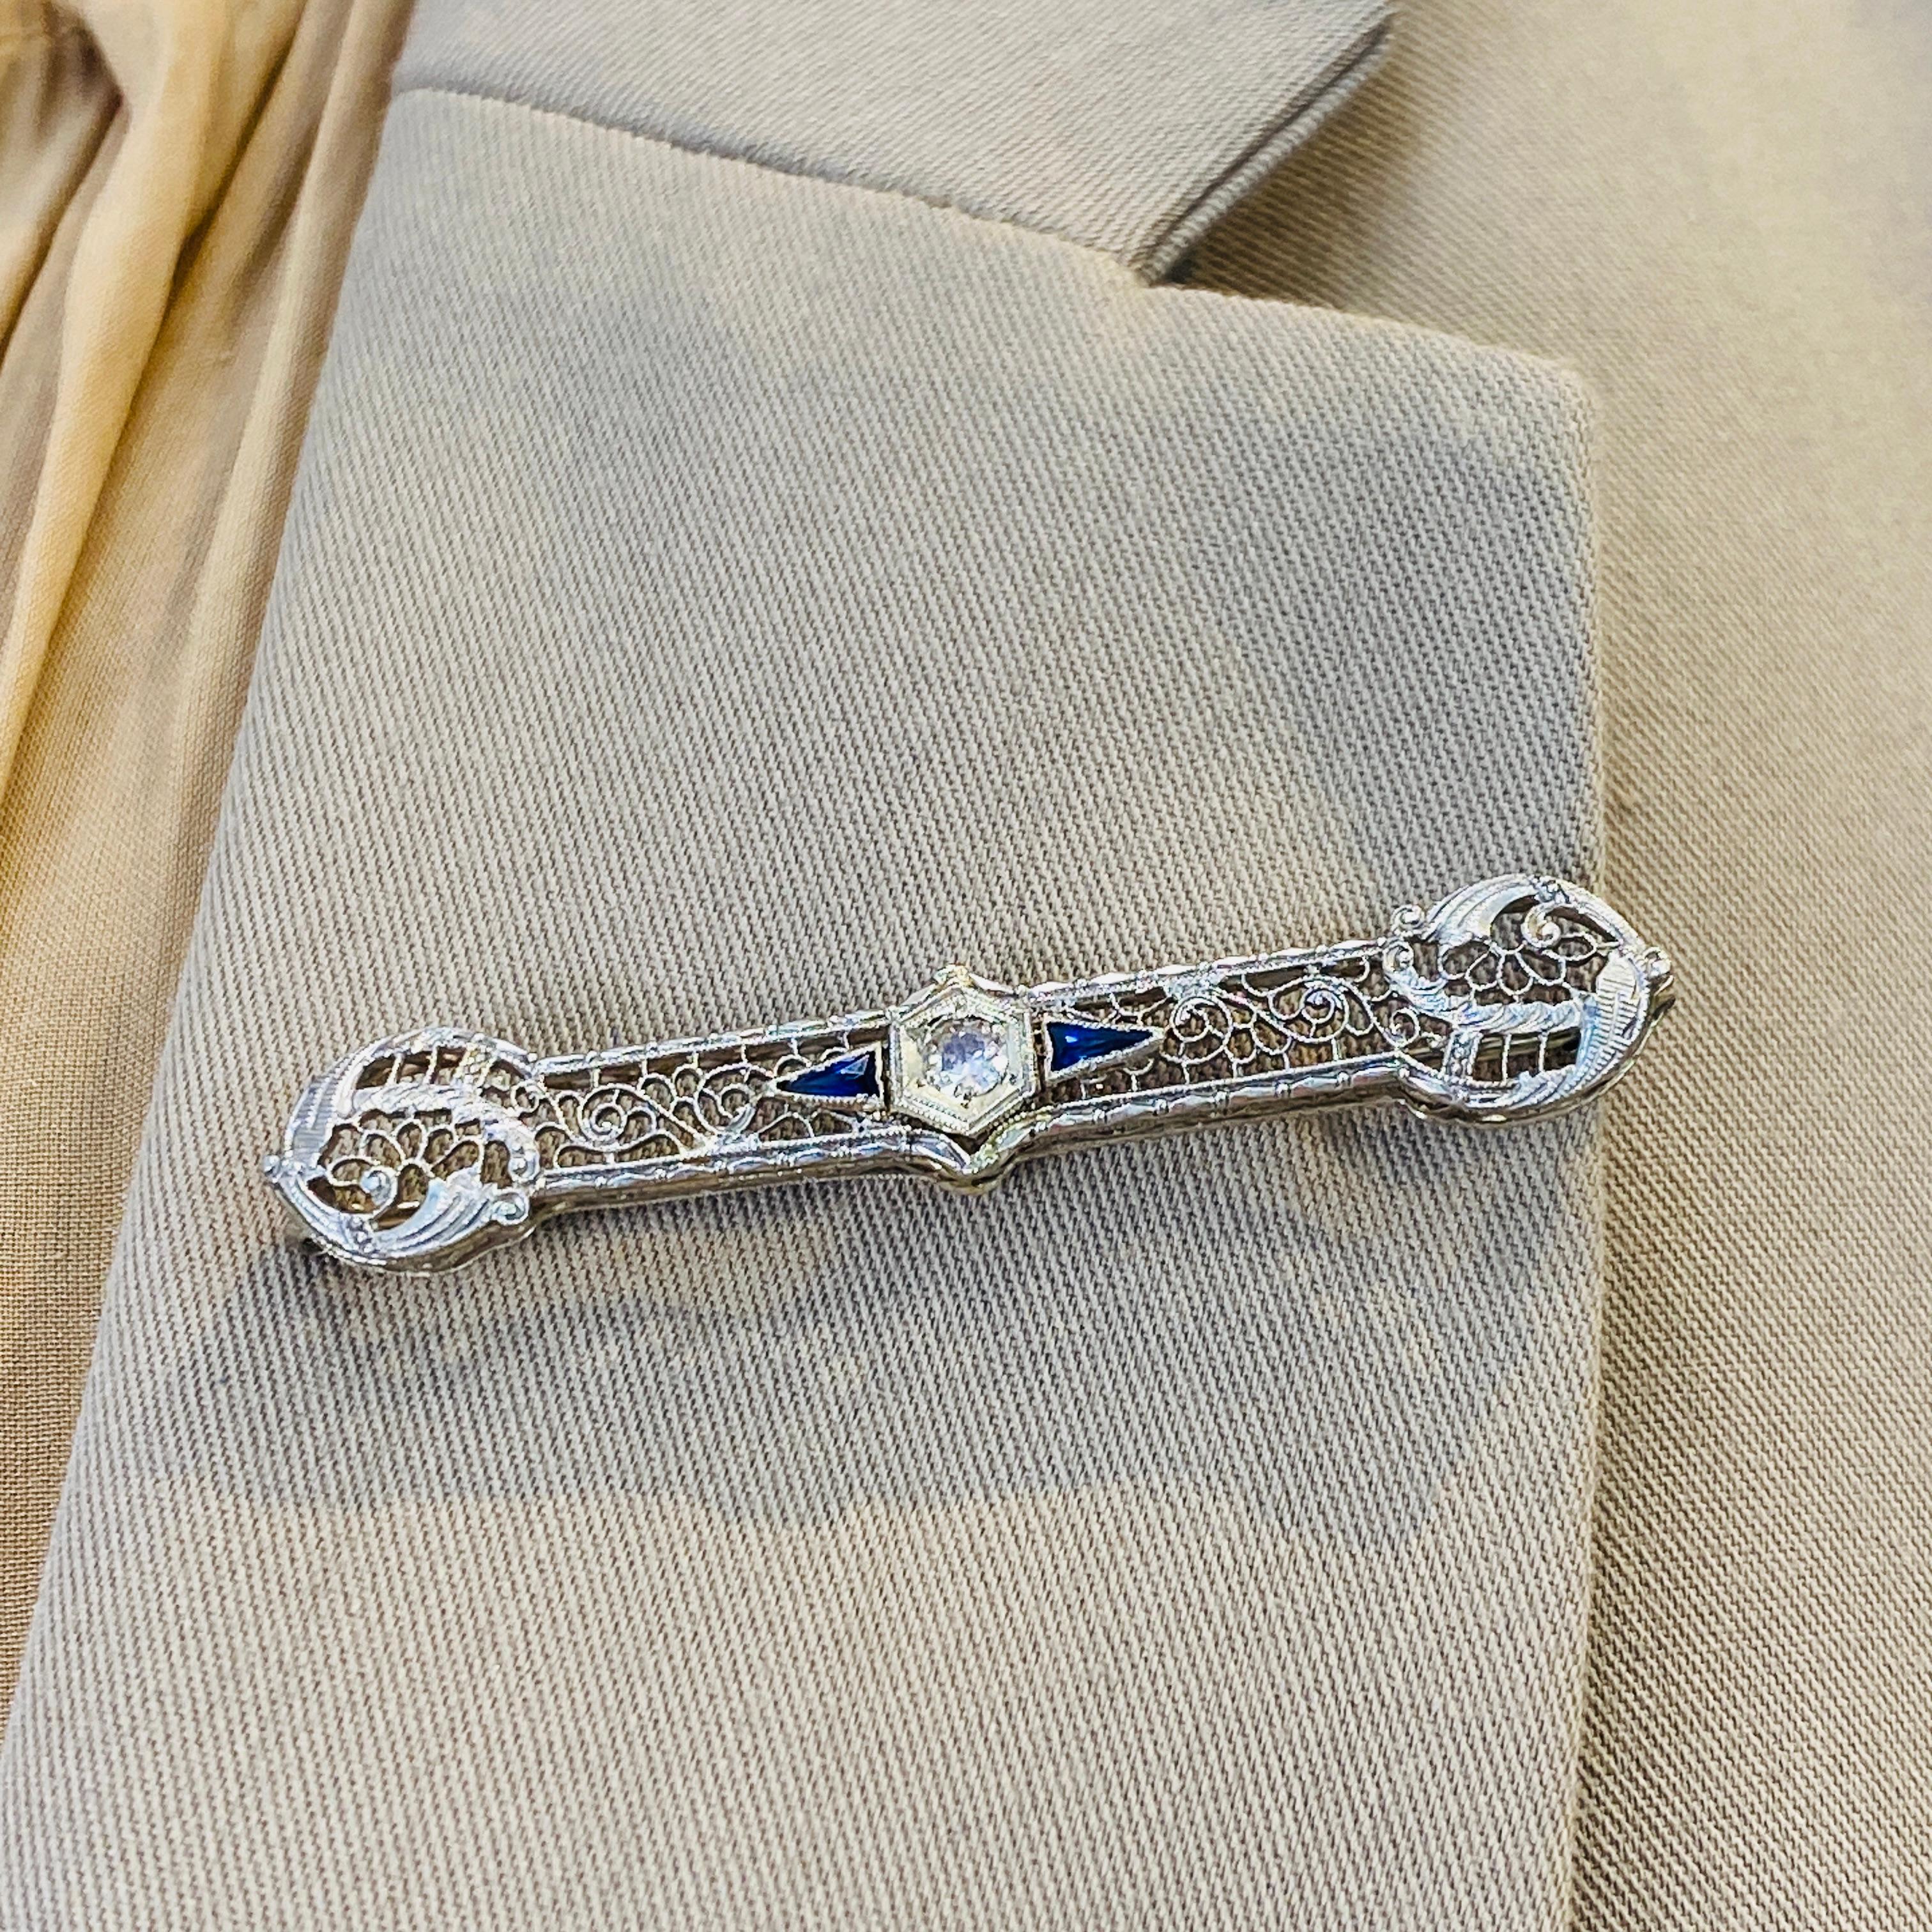 Wear a piece of art from the past with this fanciful floral wirework pin! This is a beautifully made and preserved vintage brooch in 14 karat white gold. A lovely old European cut diamond sits at the center of the brooch and shines bright with